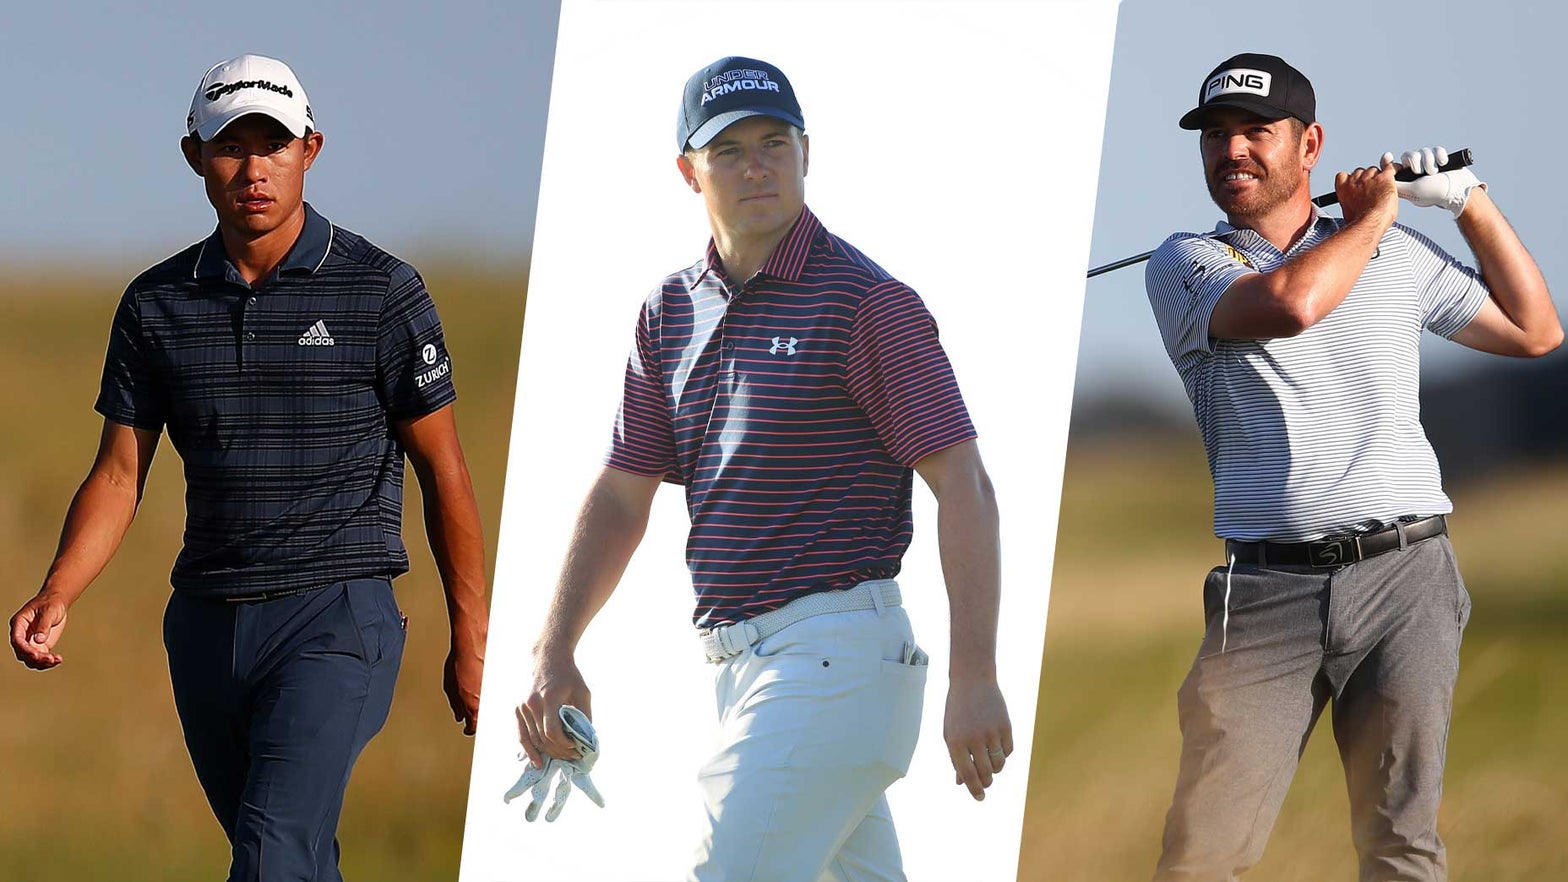 Who will win the British Open? We rank the contenders